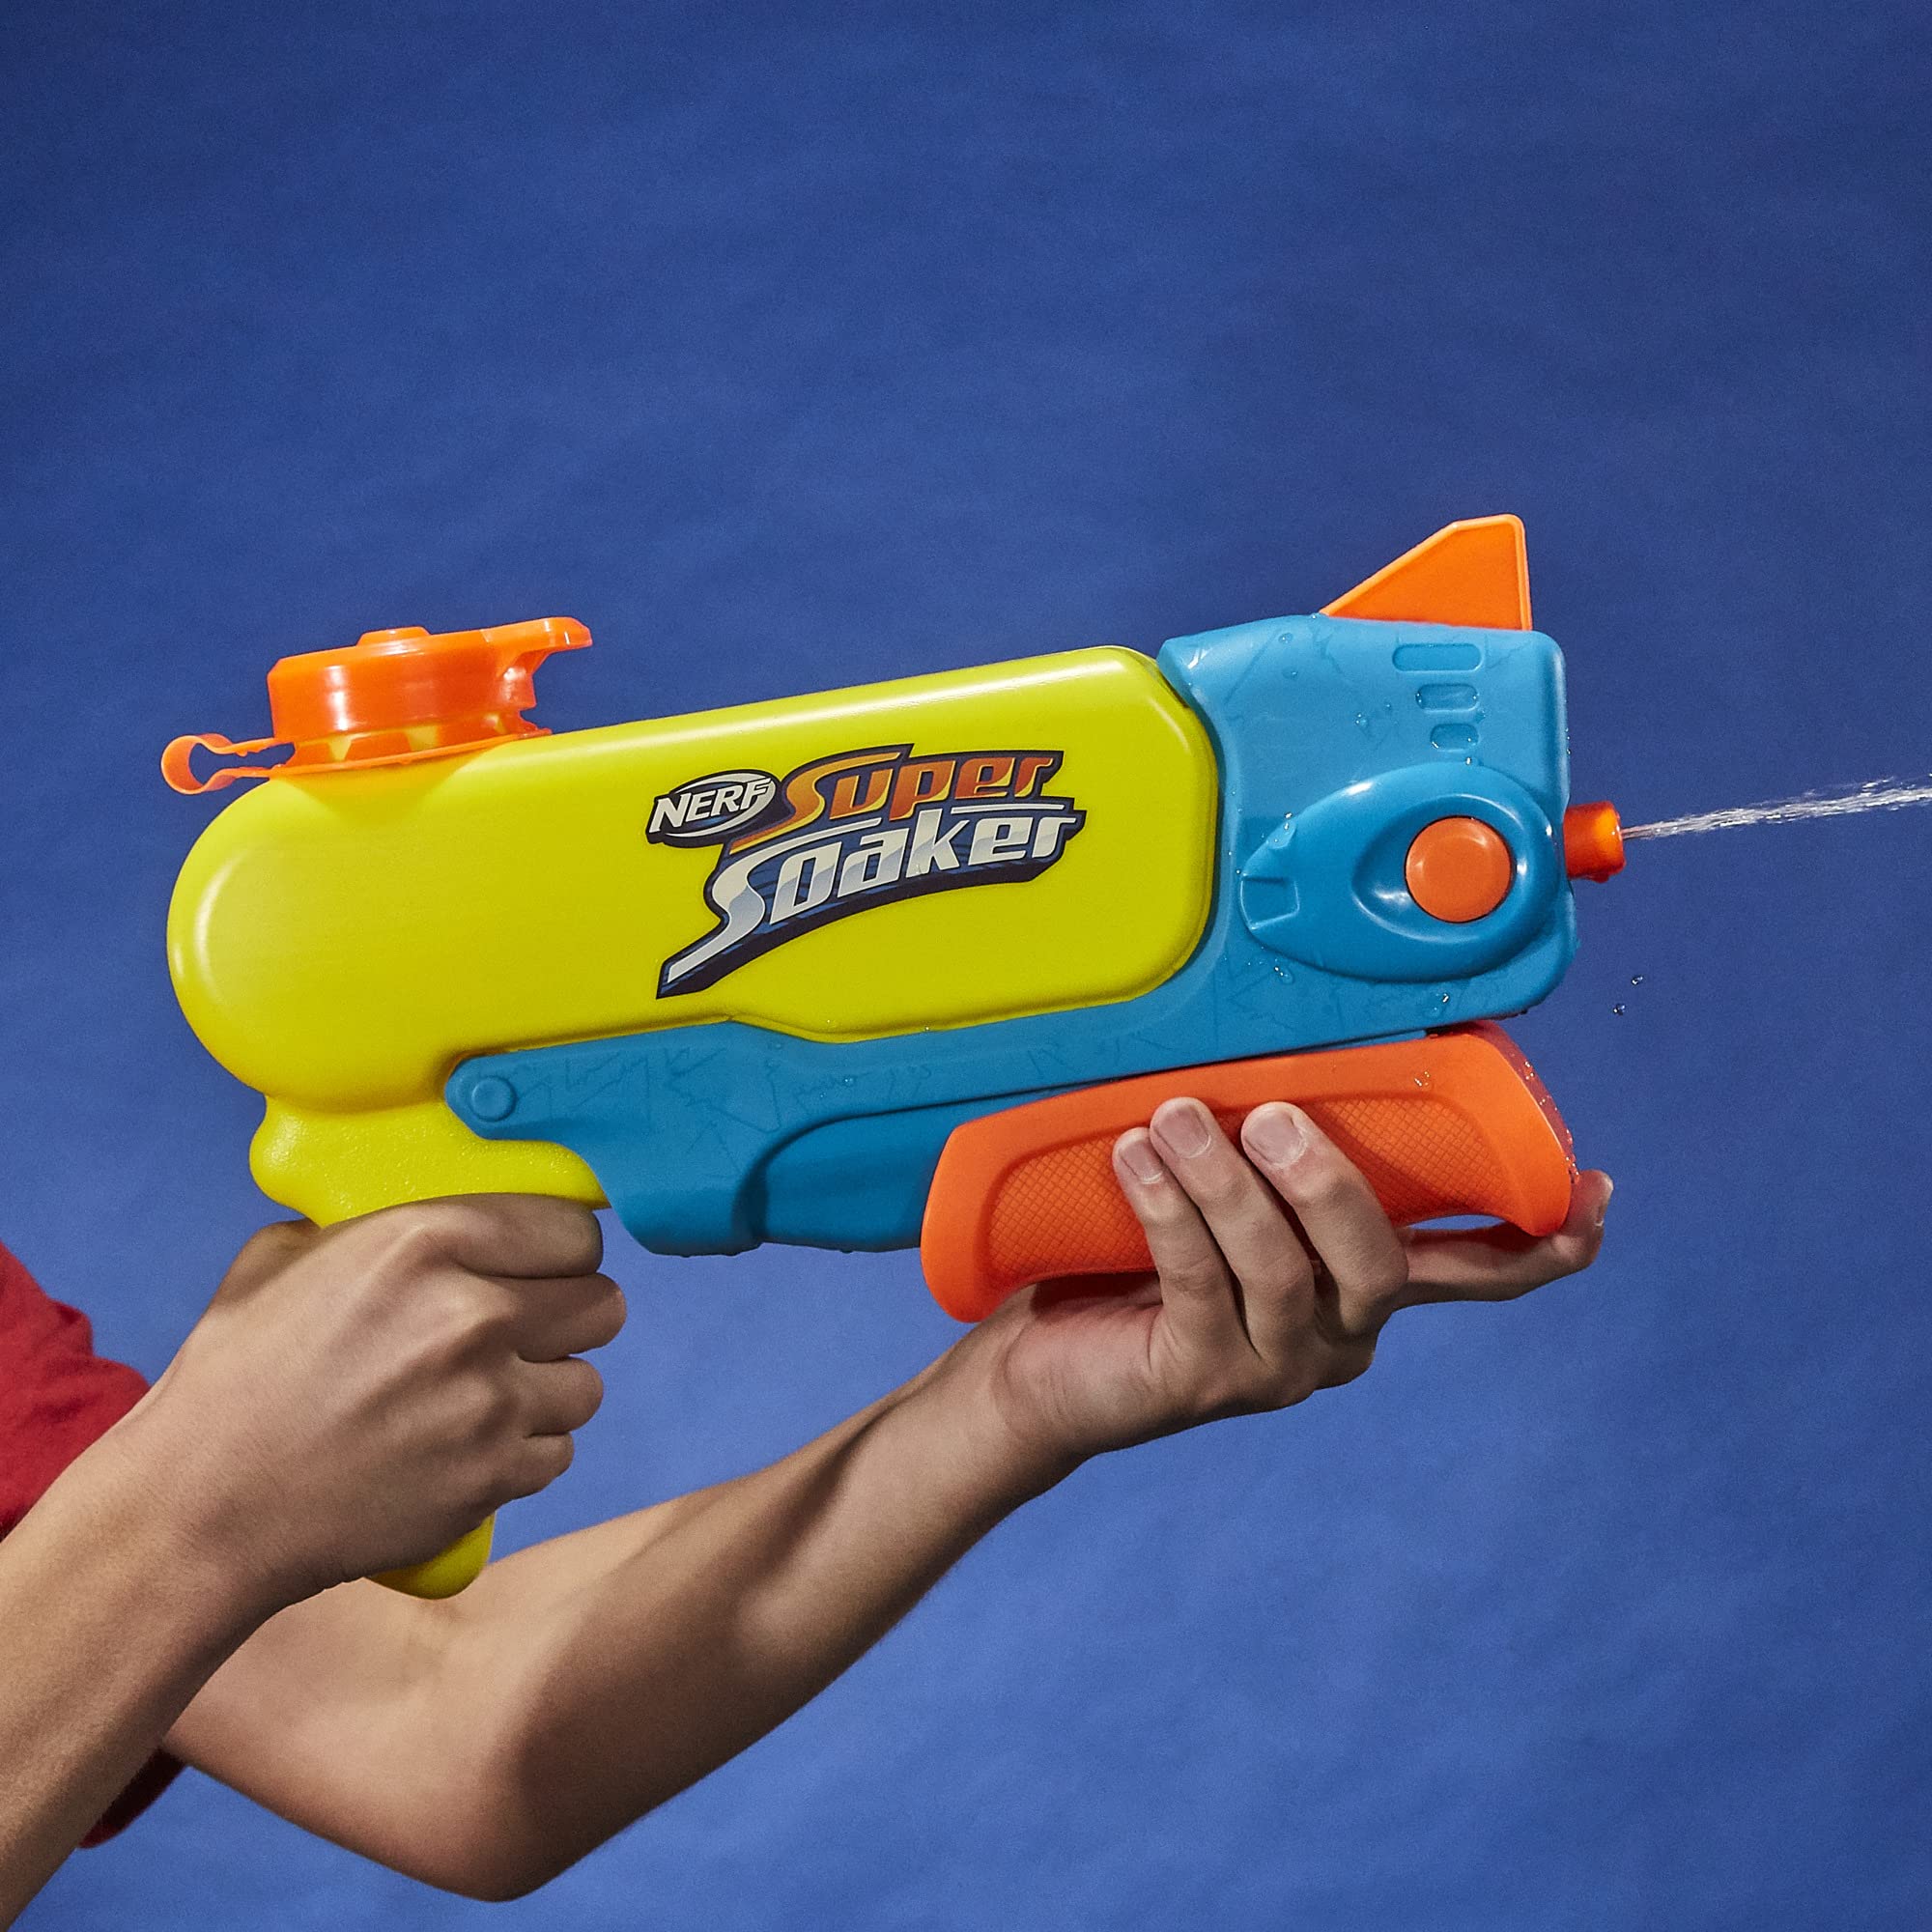 SUPERSOAKER Nerf Wave Spray Water Blaster, Wild Wave Soakage, Nozzle Moves to Create Wavy Stream, Outdoor Games and Water Toys